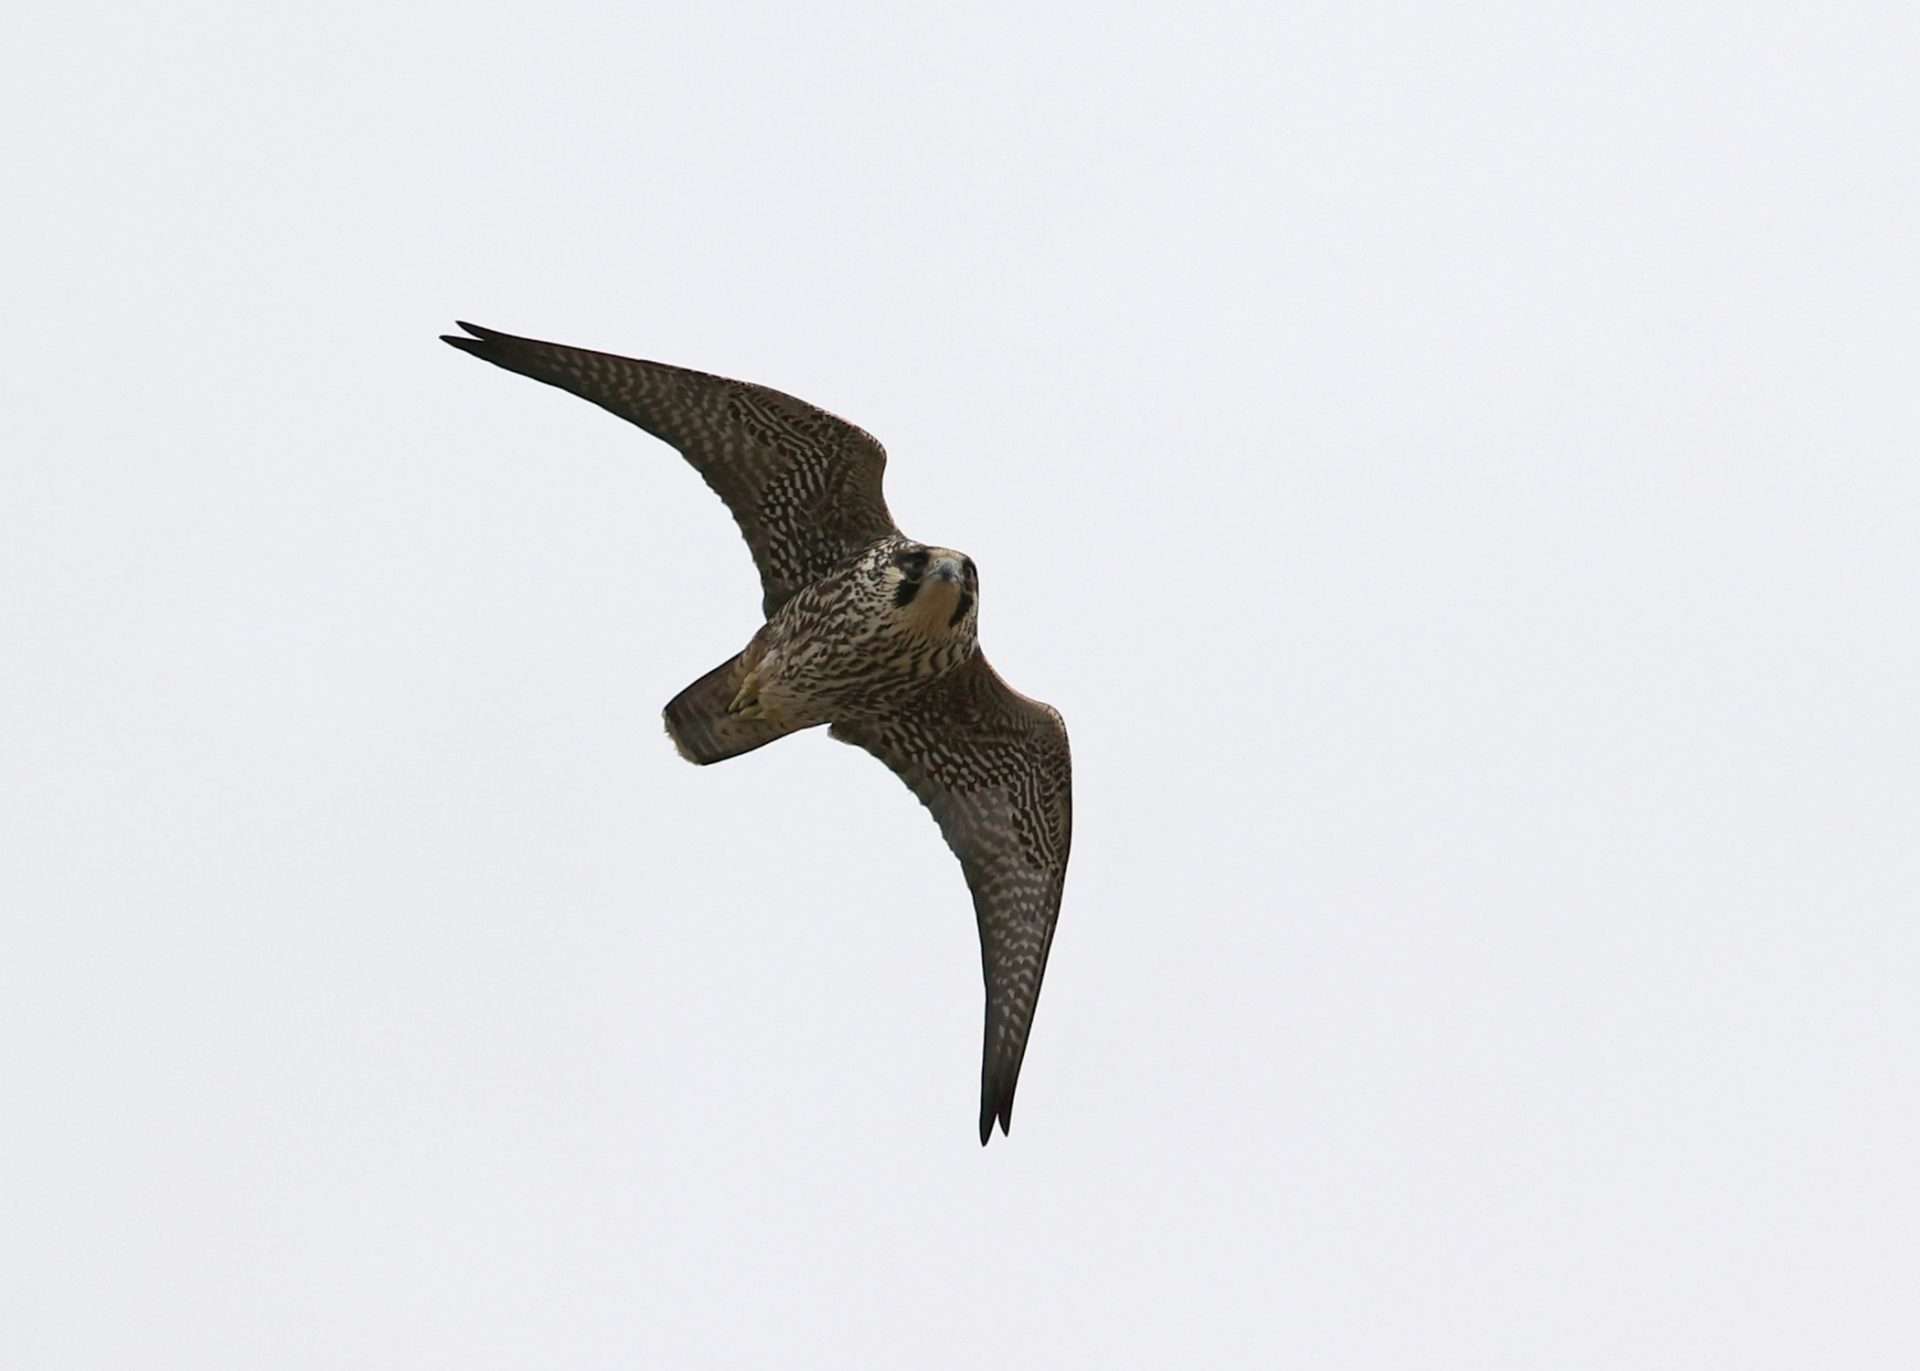 Peregrine by Steve Hopper at South Brent